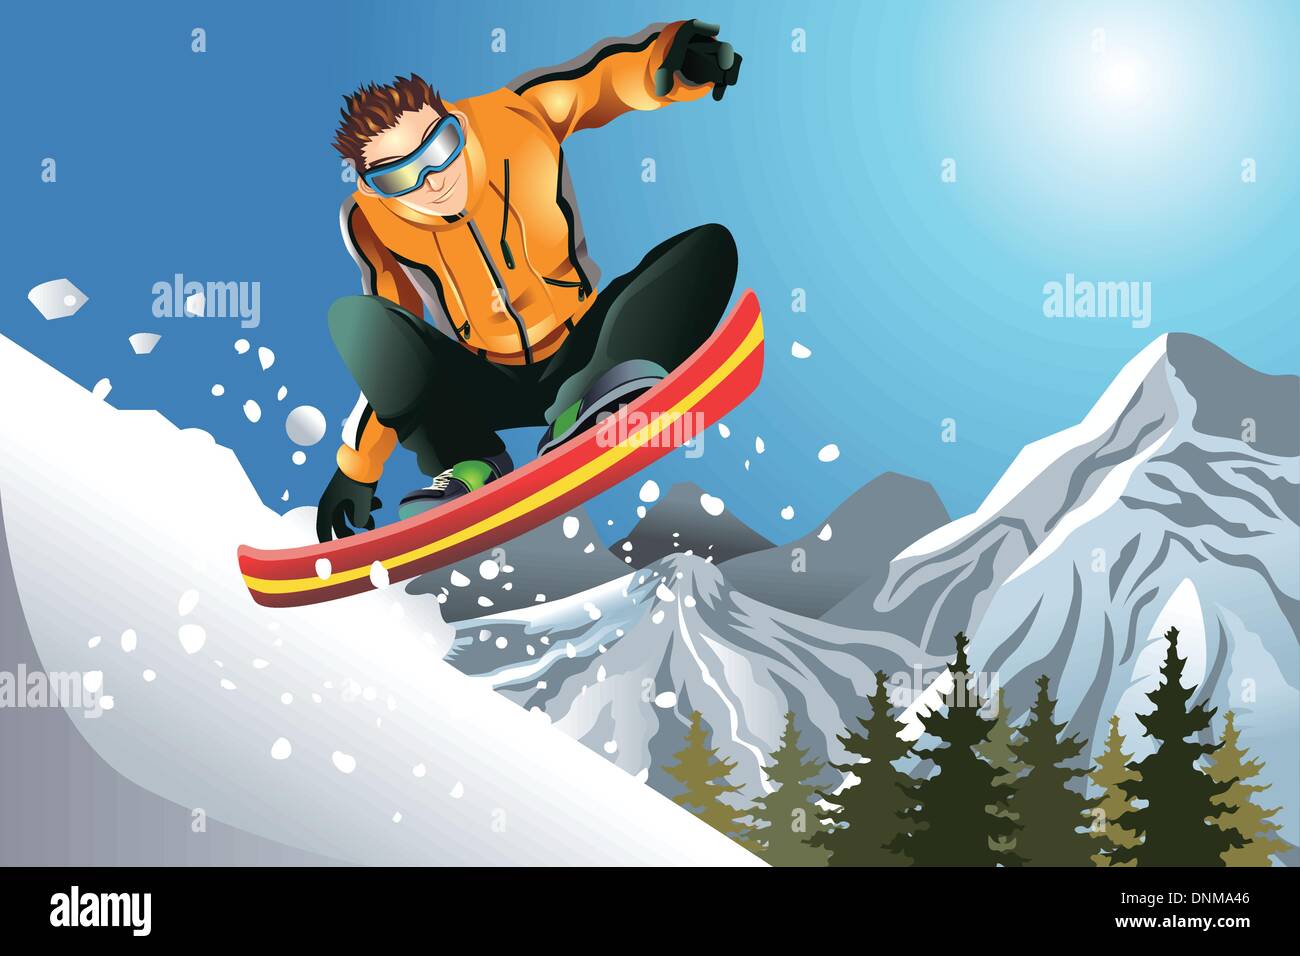 A vector illustration of a snowboarder in action Stock Vector